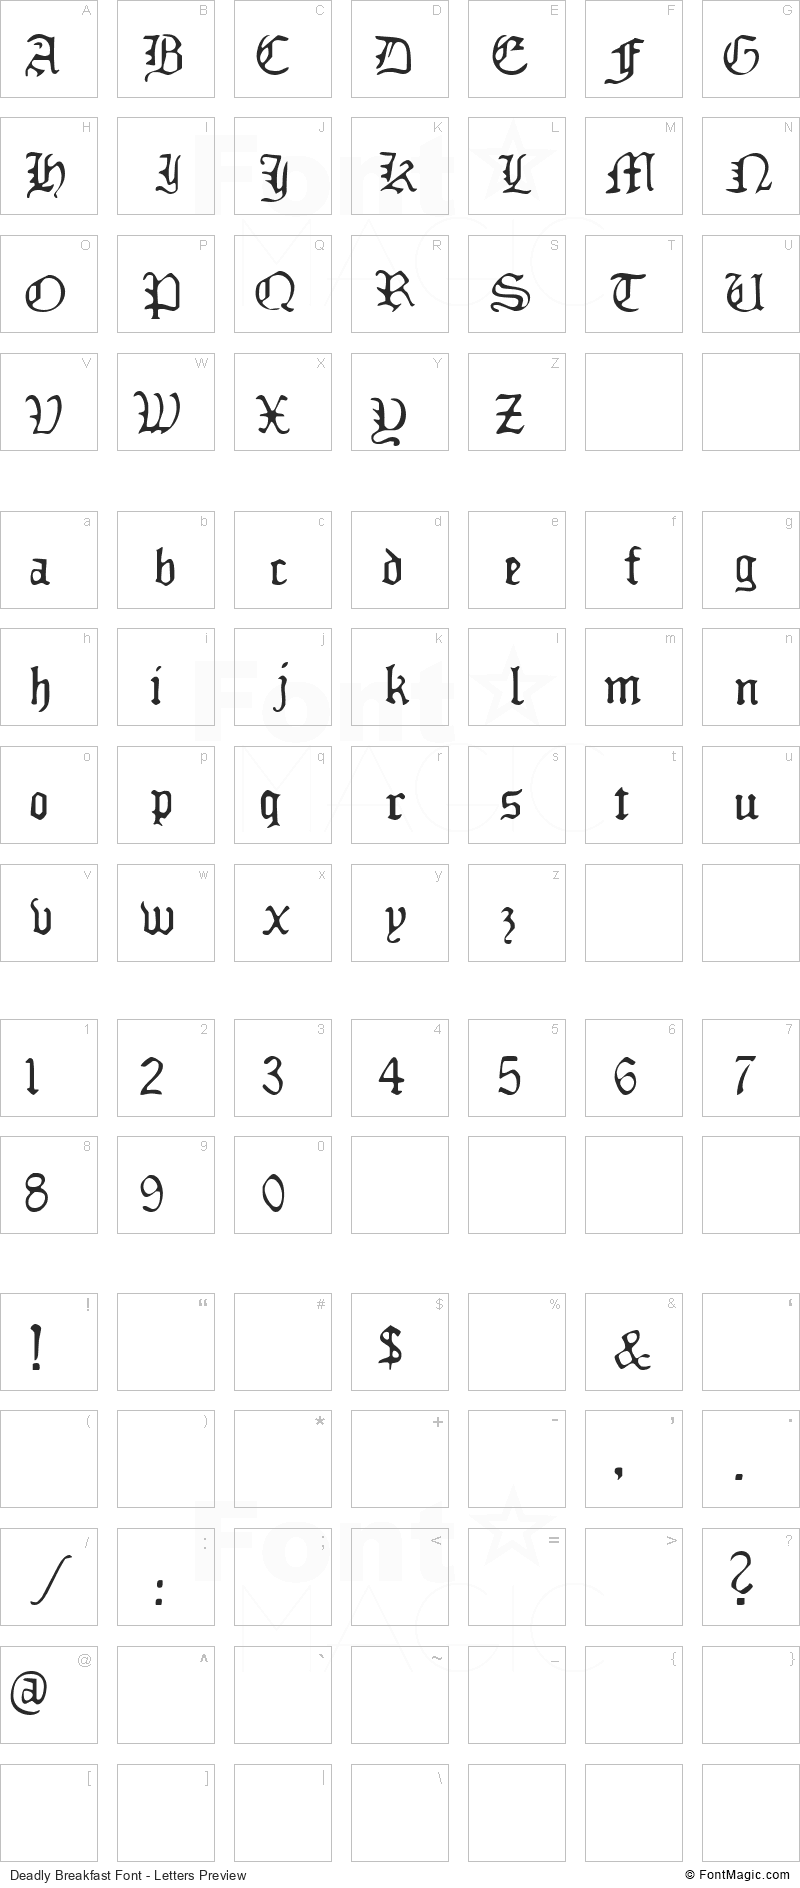 Deadly Breakfast Font - All Latters Preview Chart